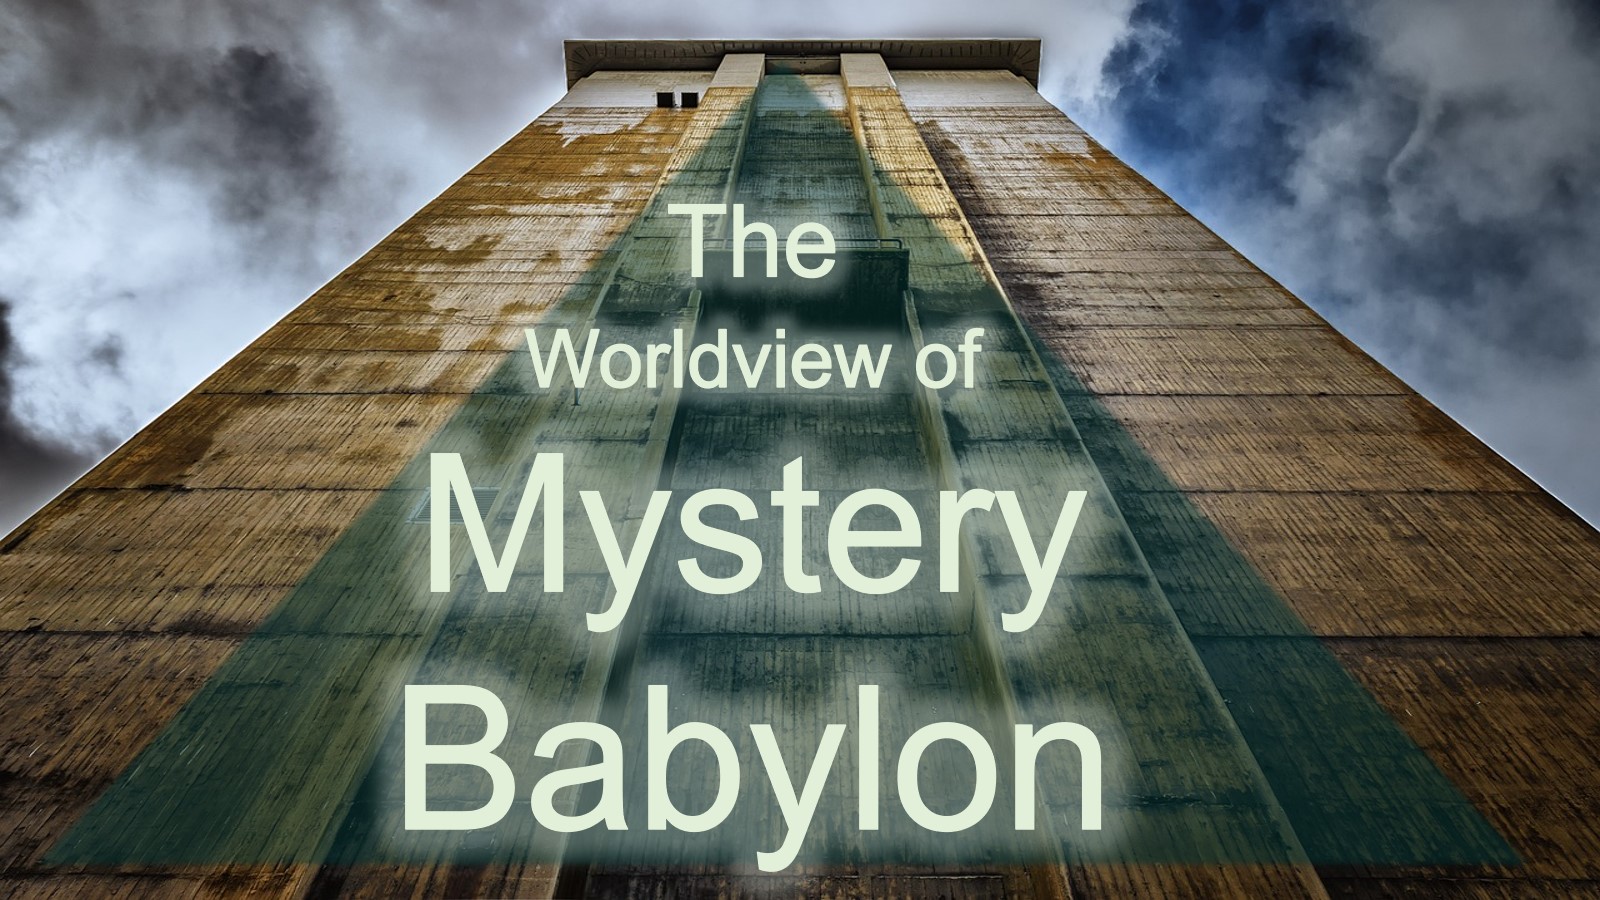 The Worldview of Mystery Babylon